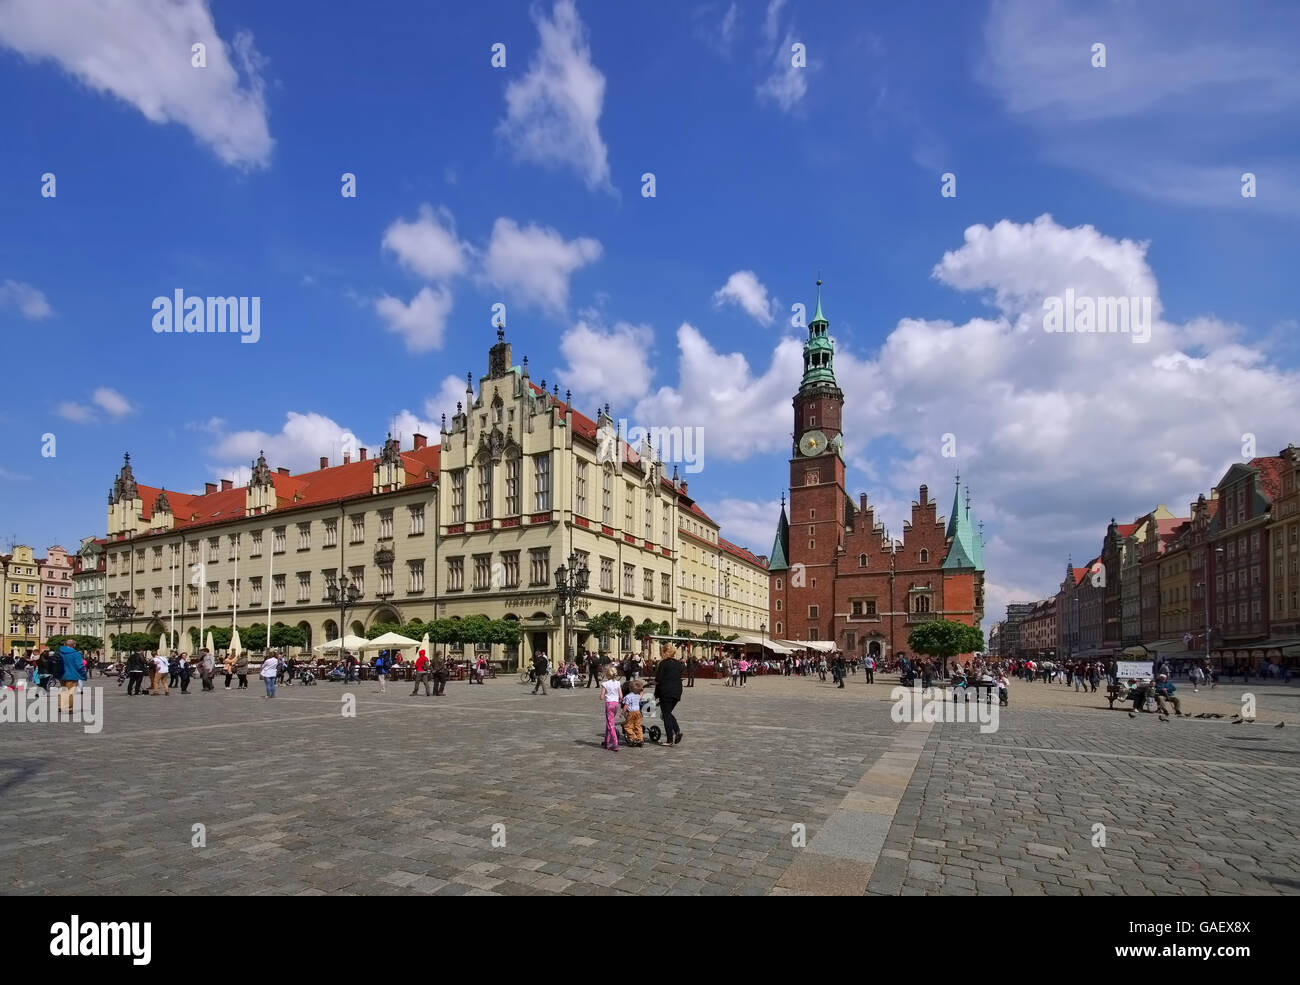 Breslau Rathaus - Wroclaw, the old gothic town hall and Main Square Stock Photo